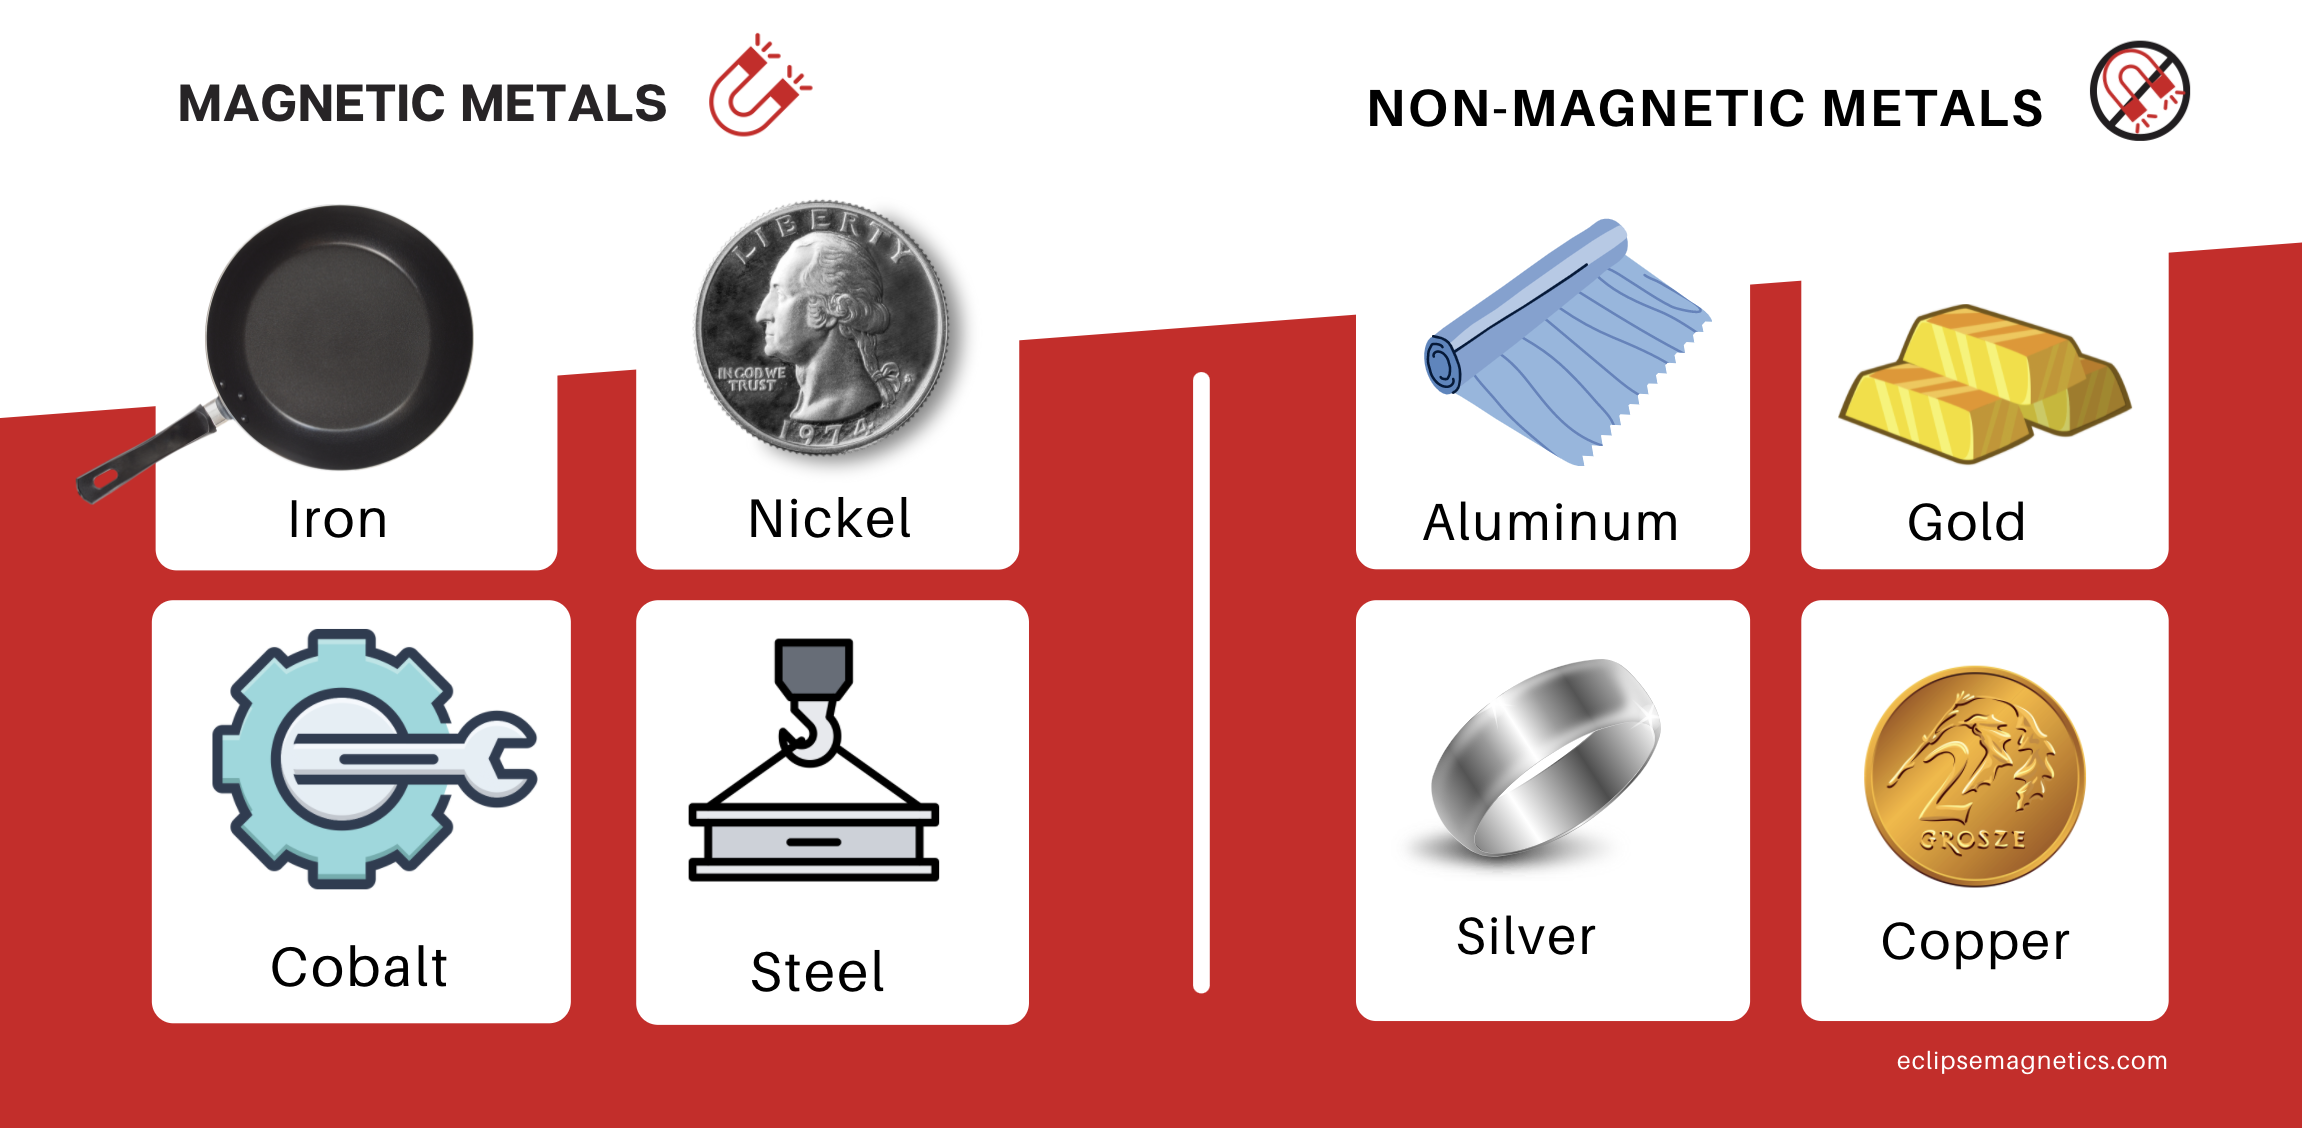 A Quick Guide to Magnets, Magnetic Metals & Non-Magnetic Metals